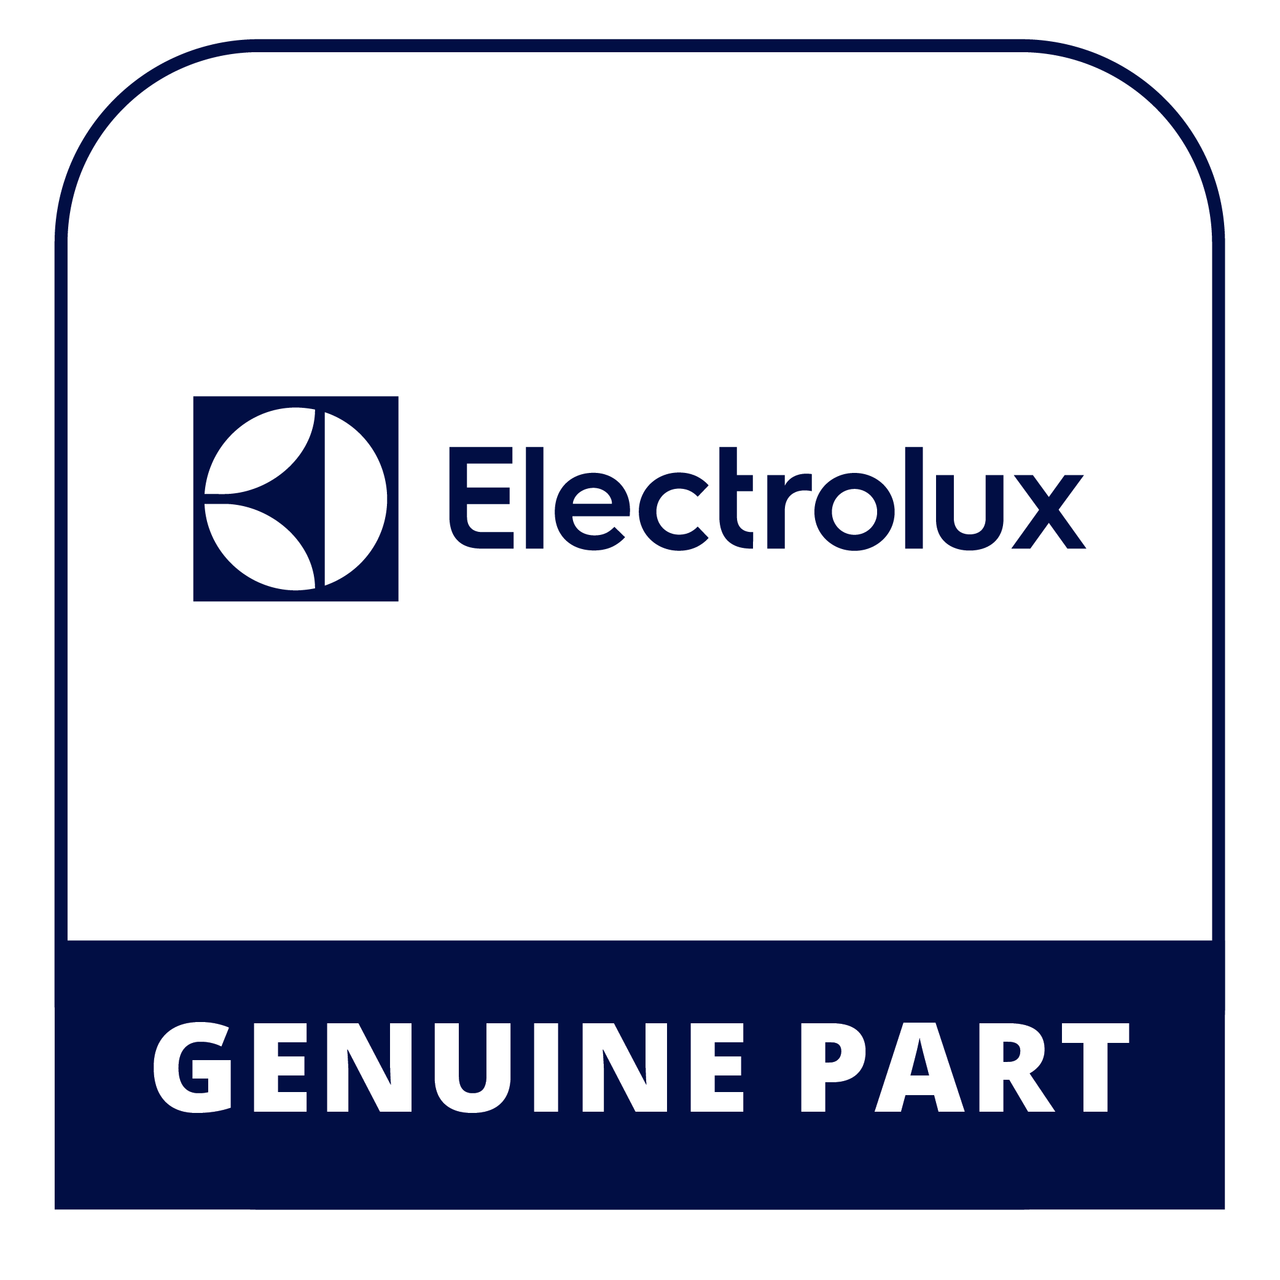 Frigidaire - Electrolux 318205845 Owners Manual - Genuine Electrolux Part